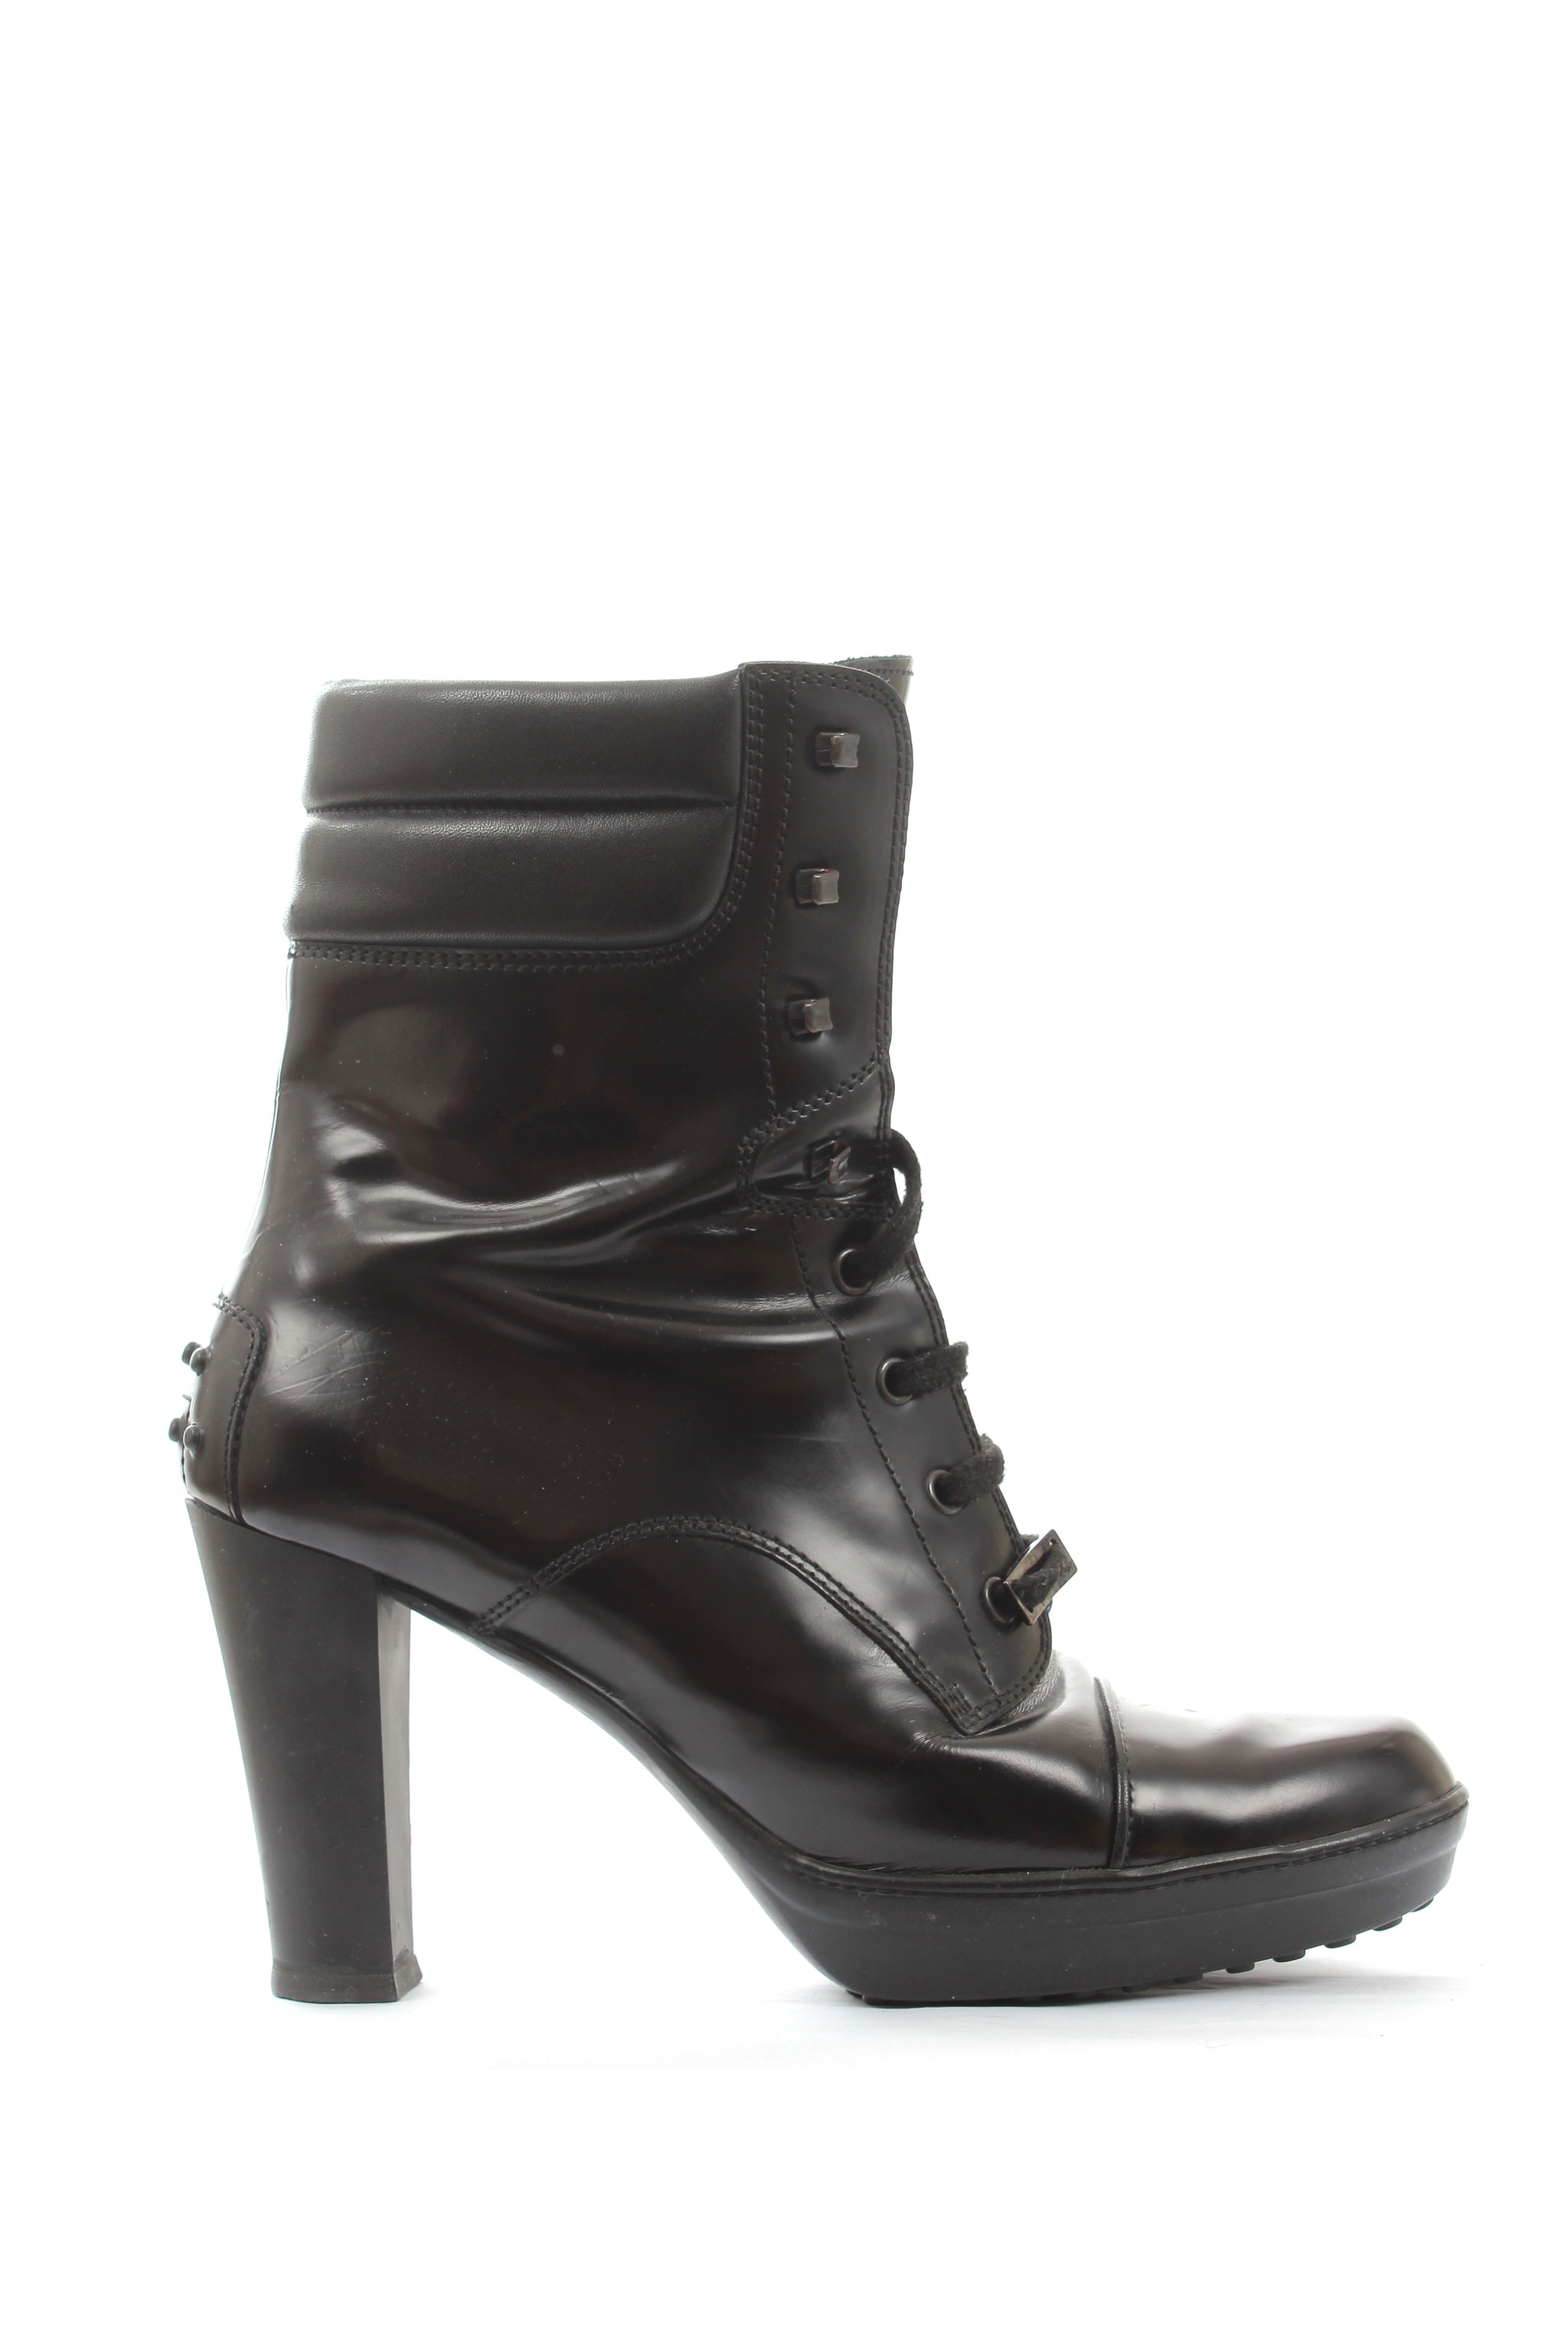 Star Trail Ankle Boot - OBSOLETES DO NOT TOUCH